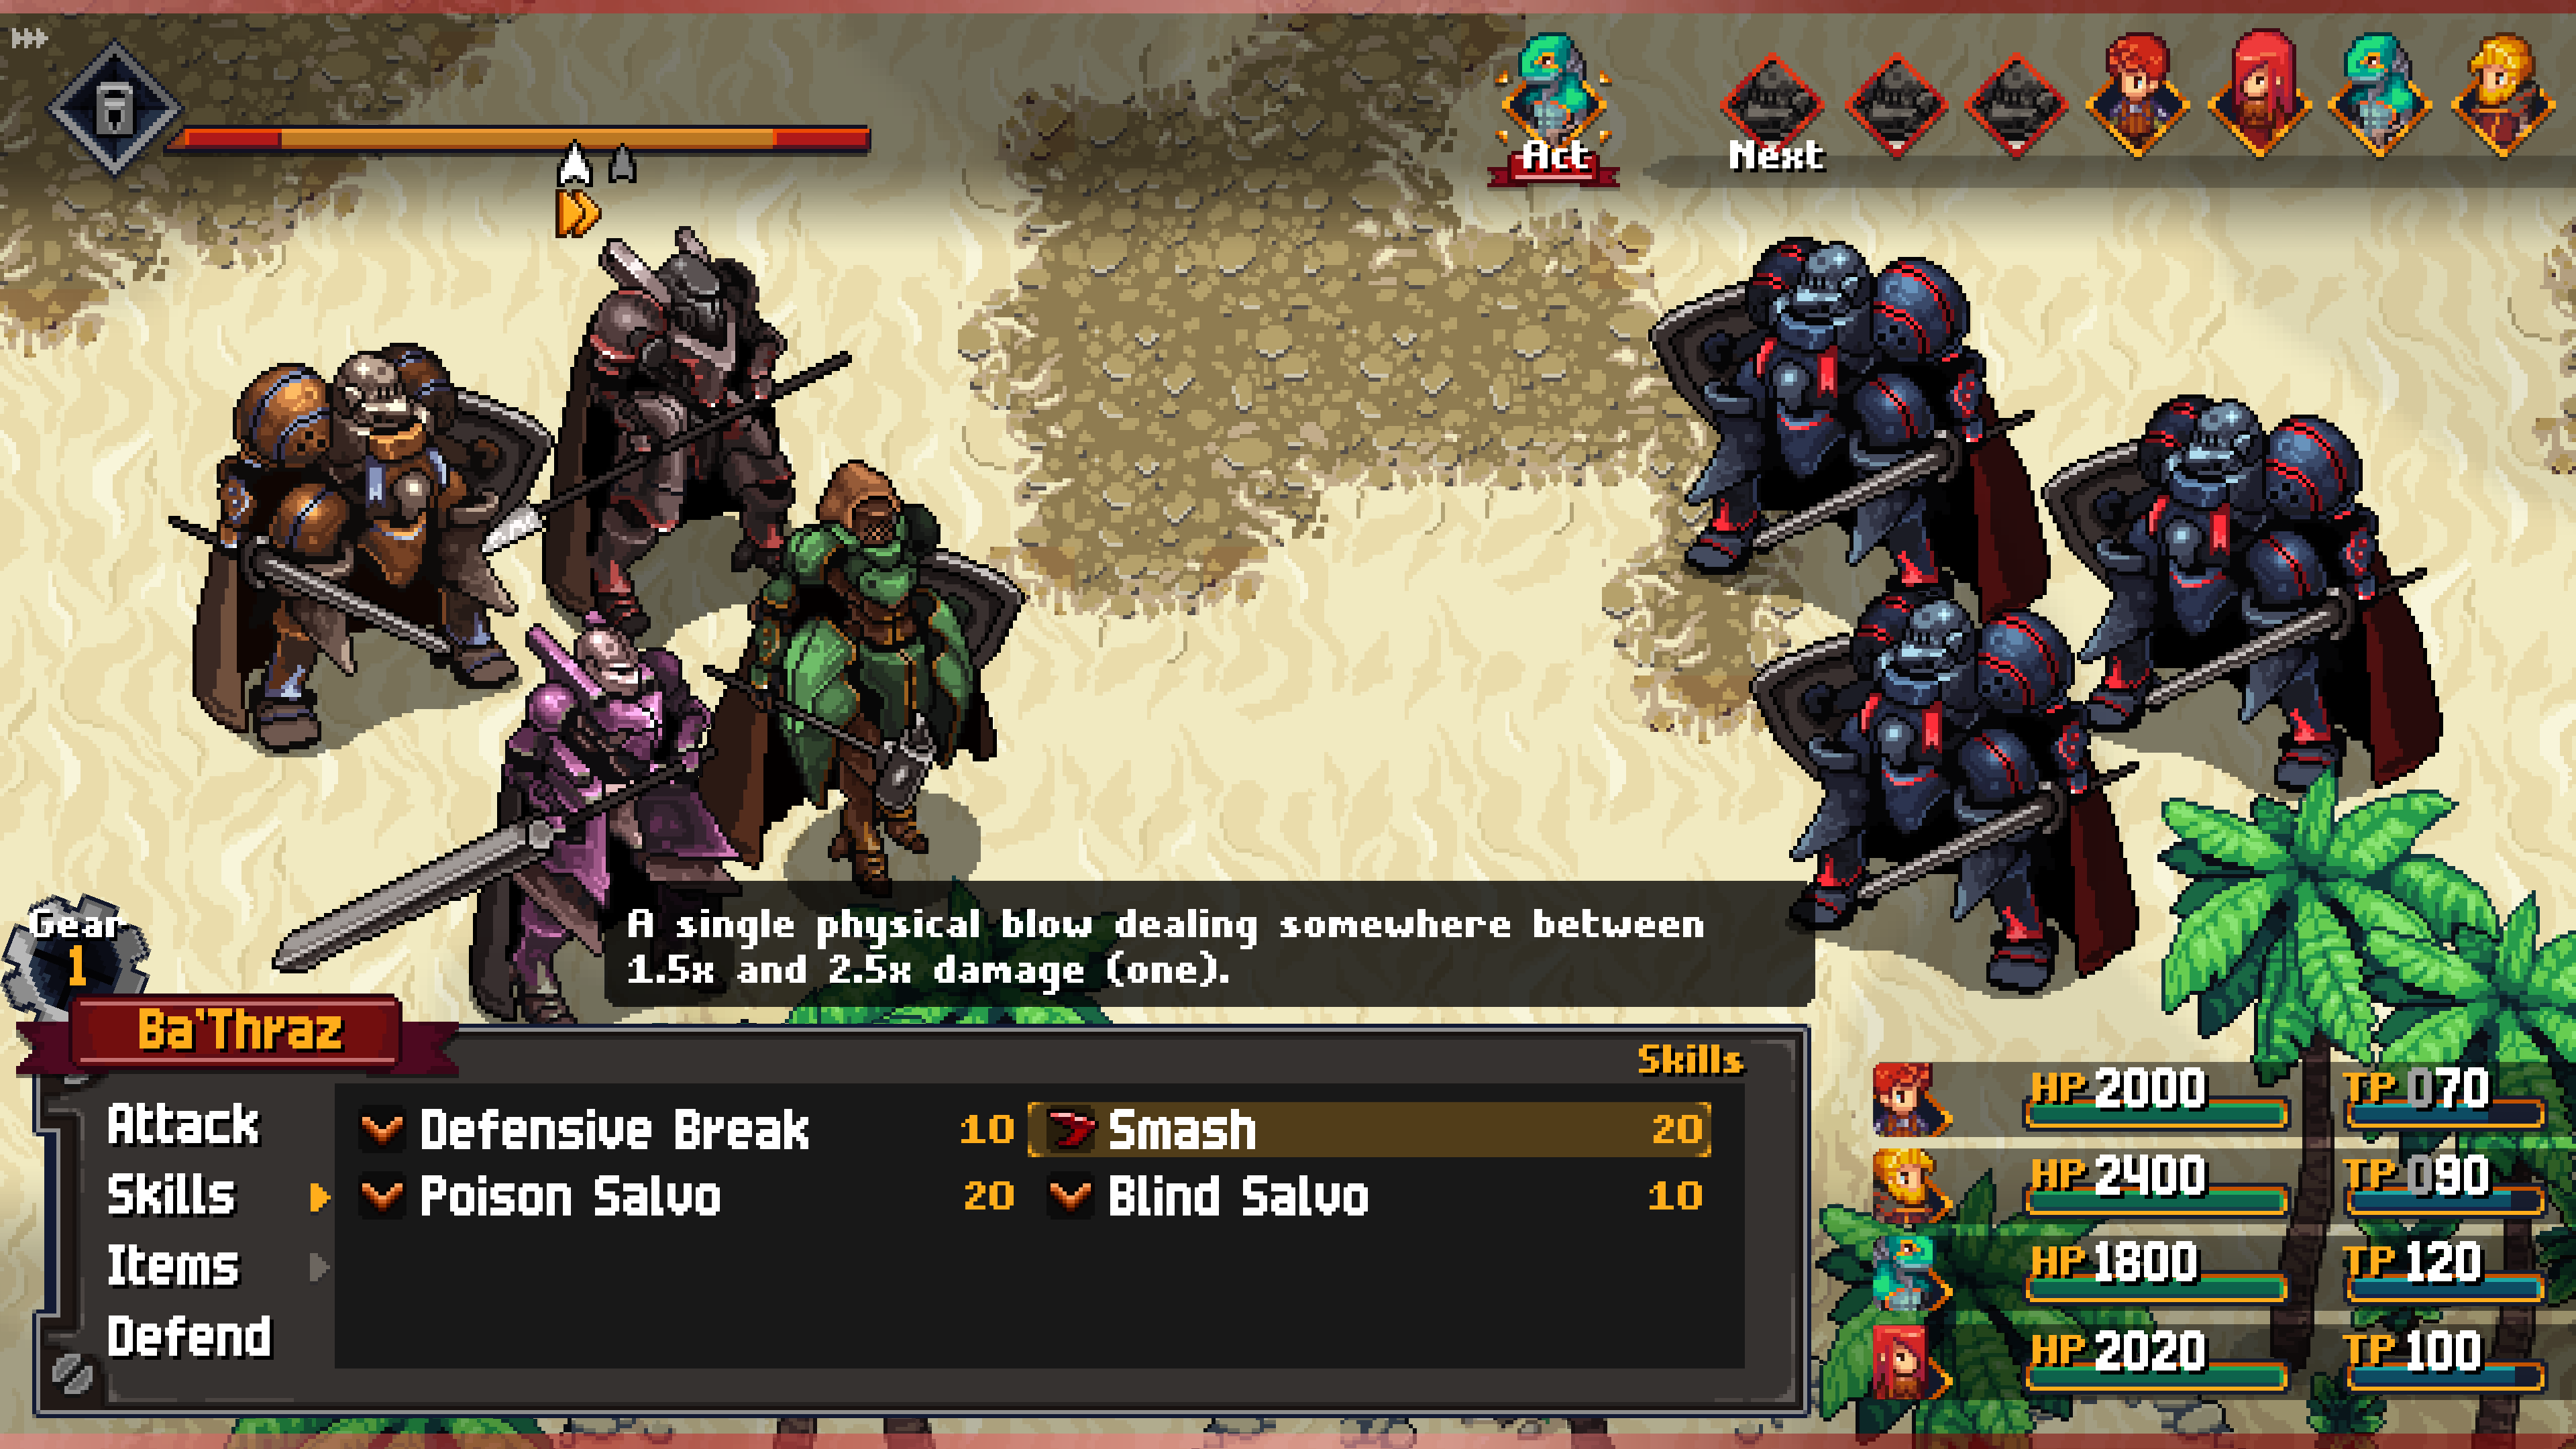 Chained Echoes, Single-Player Turn-Based JRPG